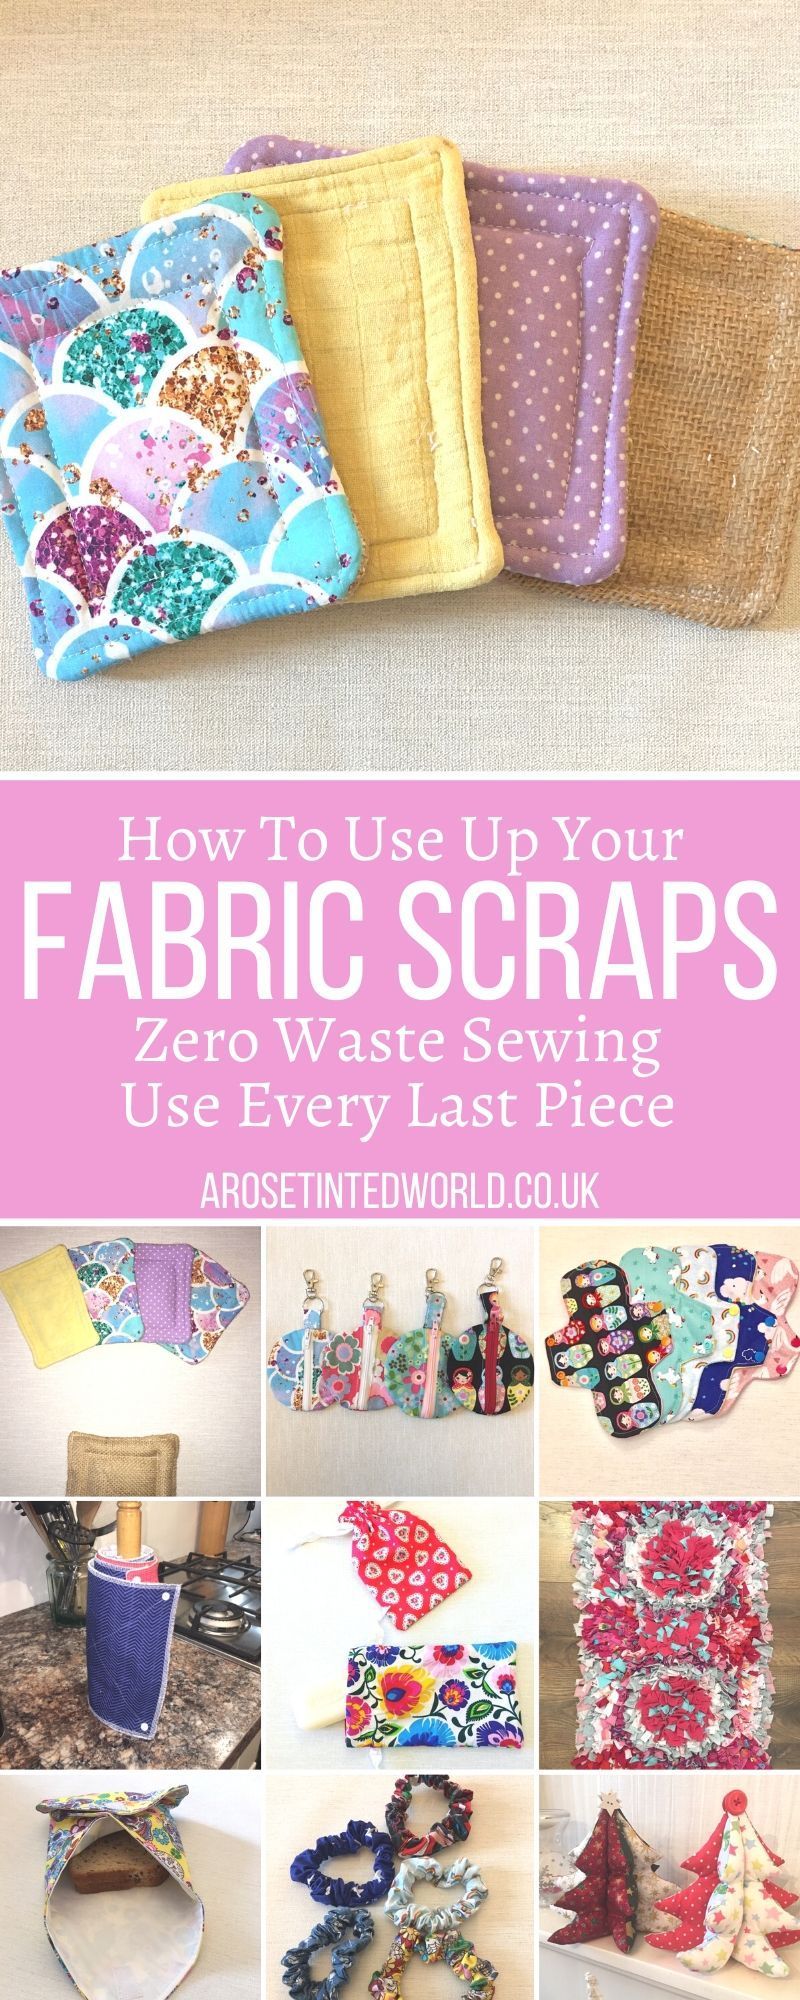 How To Use Up All Your Fabric Scraps - How To Use Up All Your Fabric Scraps -   19 fabric crafts diy easy ideas